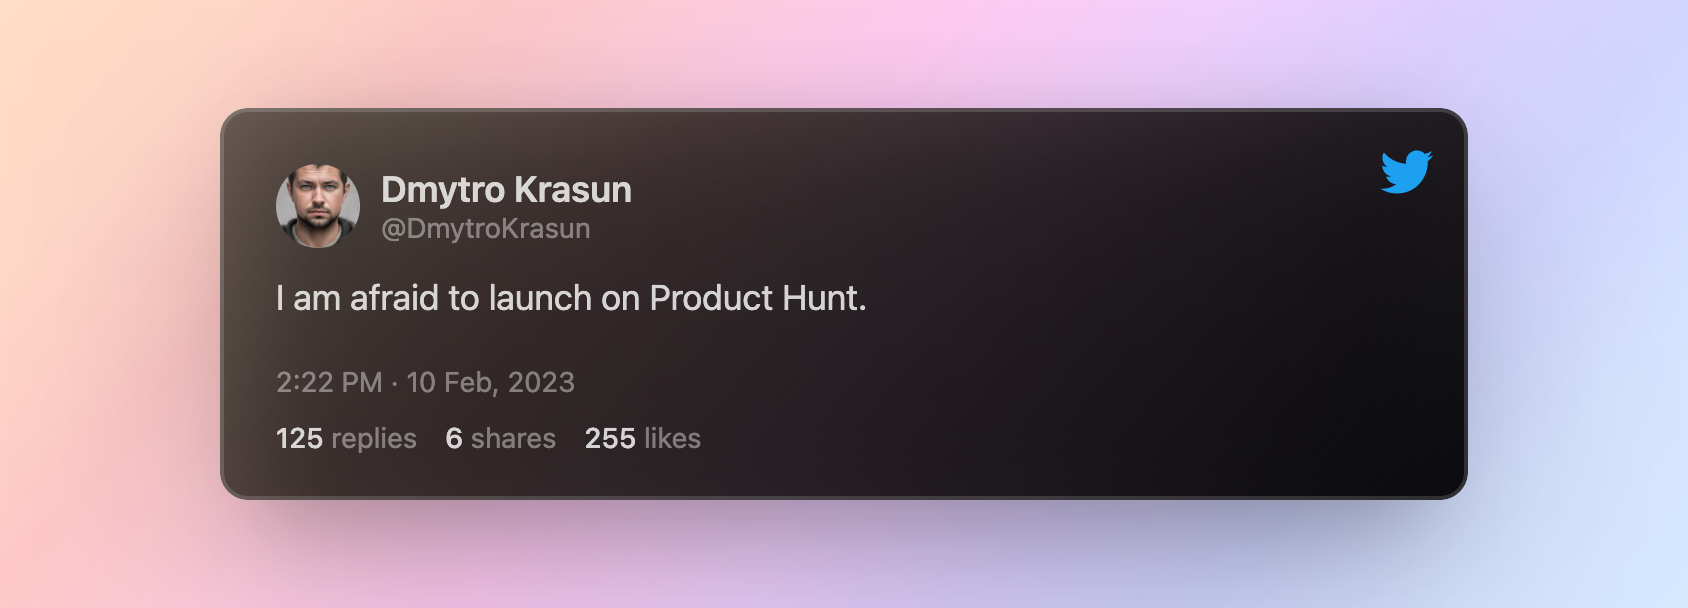 I am afraid to launch on Product Hunt